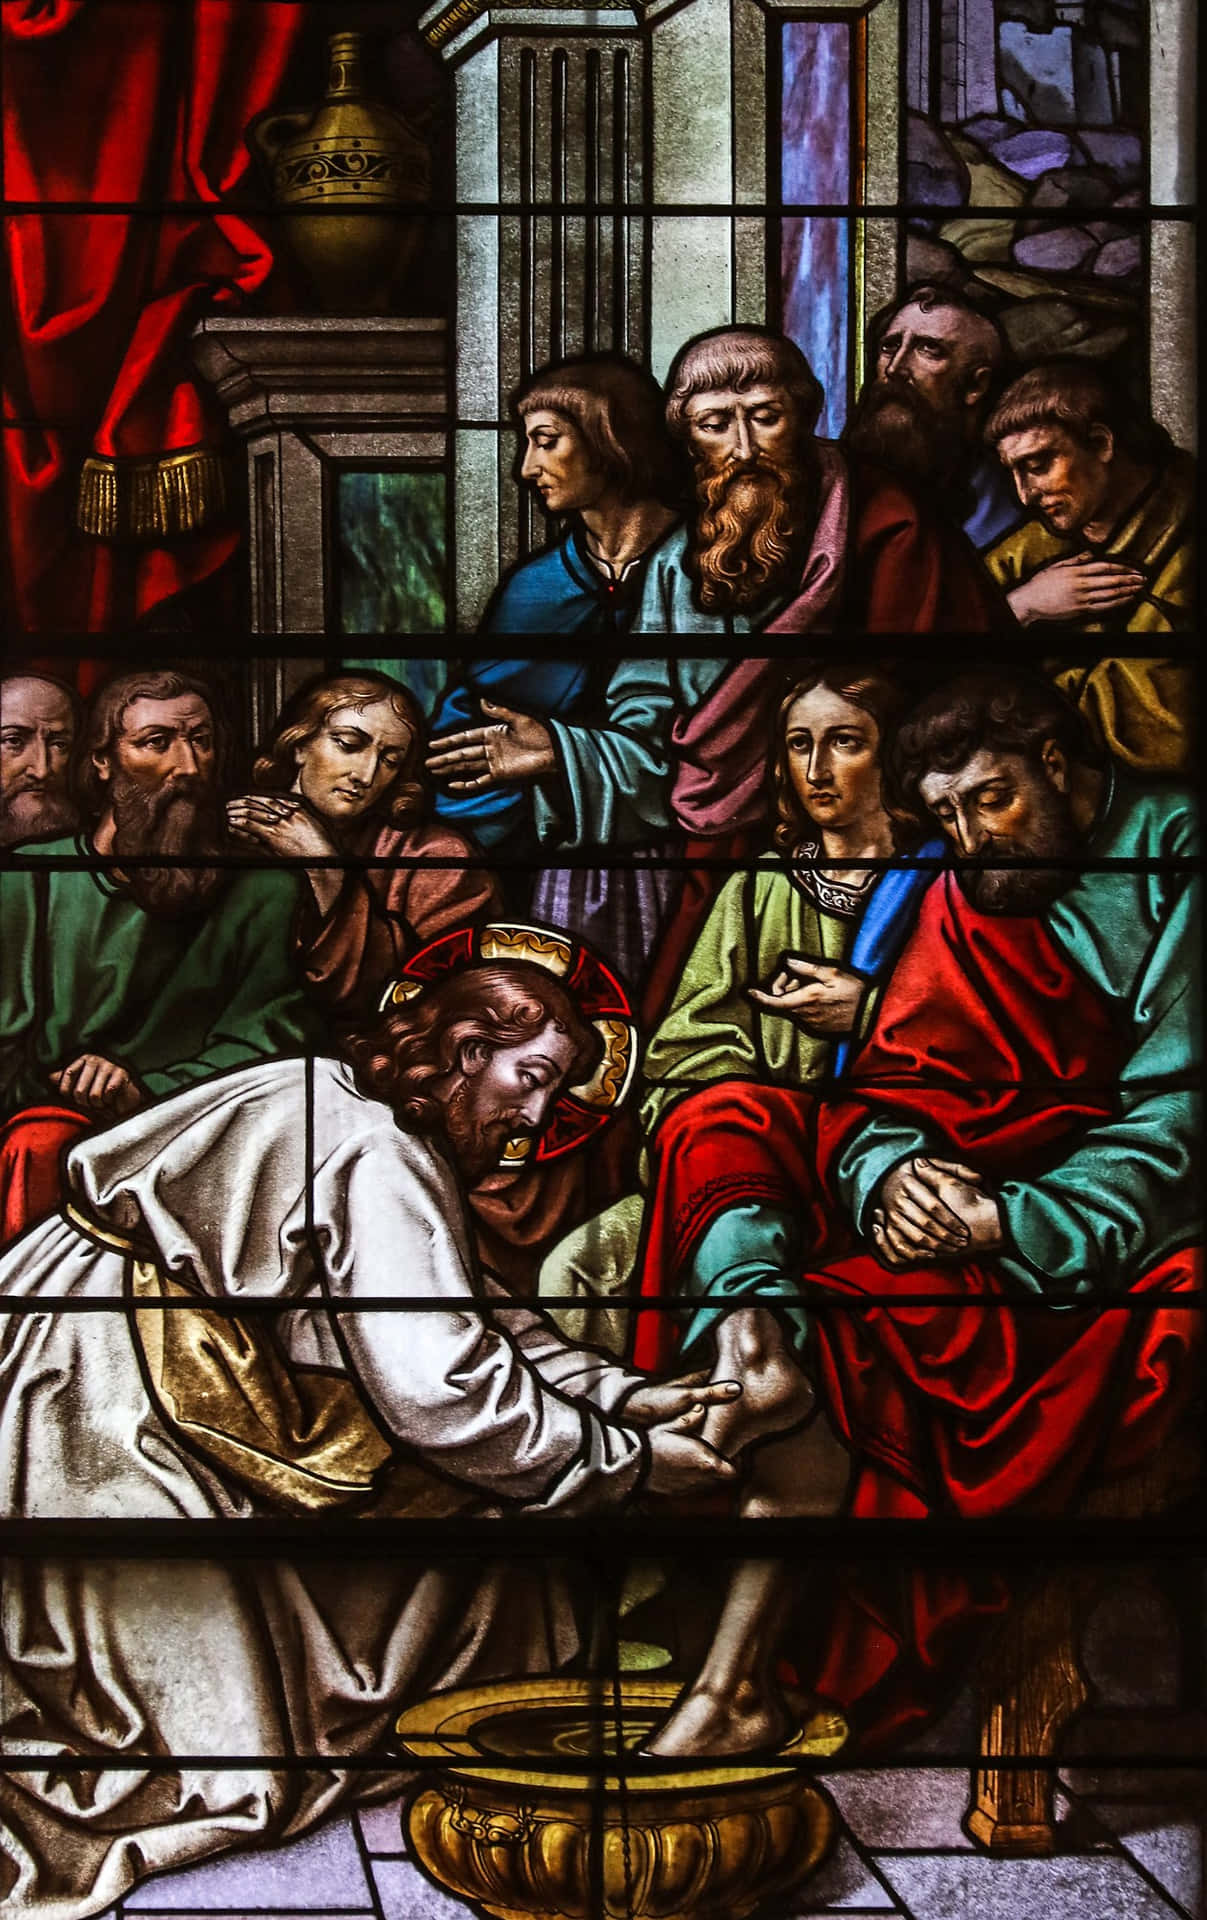 Caption: "Jesus and His Disciples: A Divine Assembly" Wallpaper